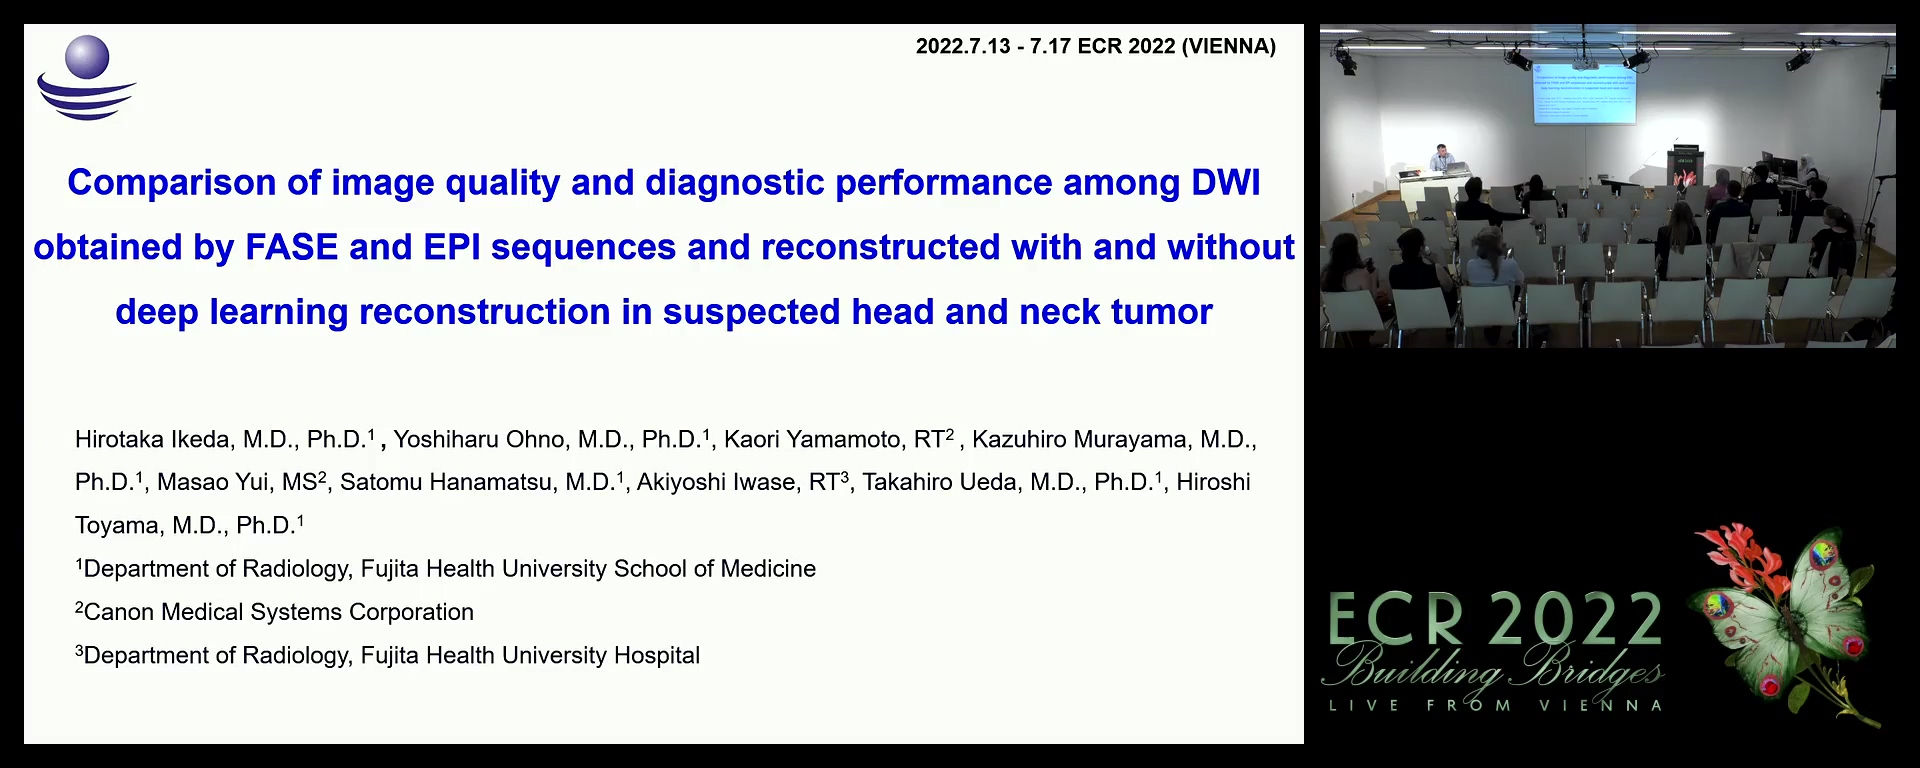 Comparison of image quality and diagnostic performance among DWI obtained by FASE and EPI sequences and reconstructed with and without deep learning reconstruction in suspected head and neck tumour